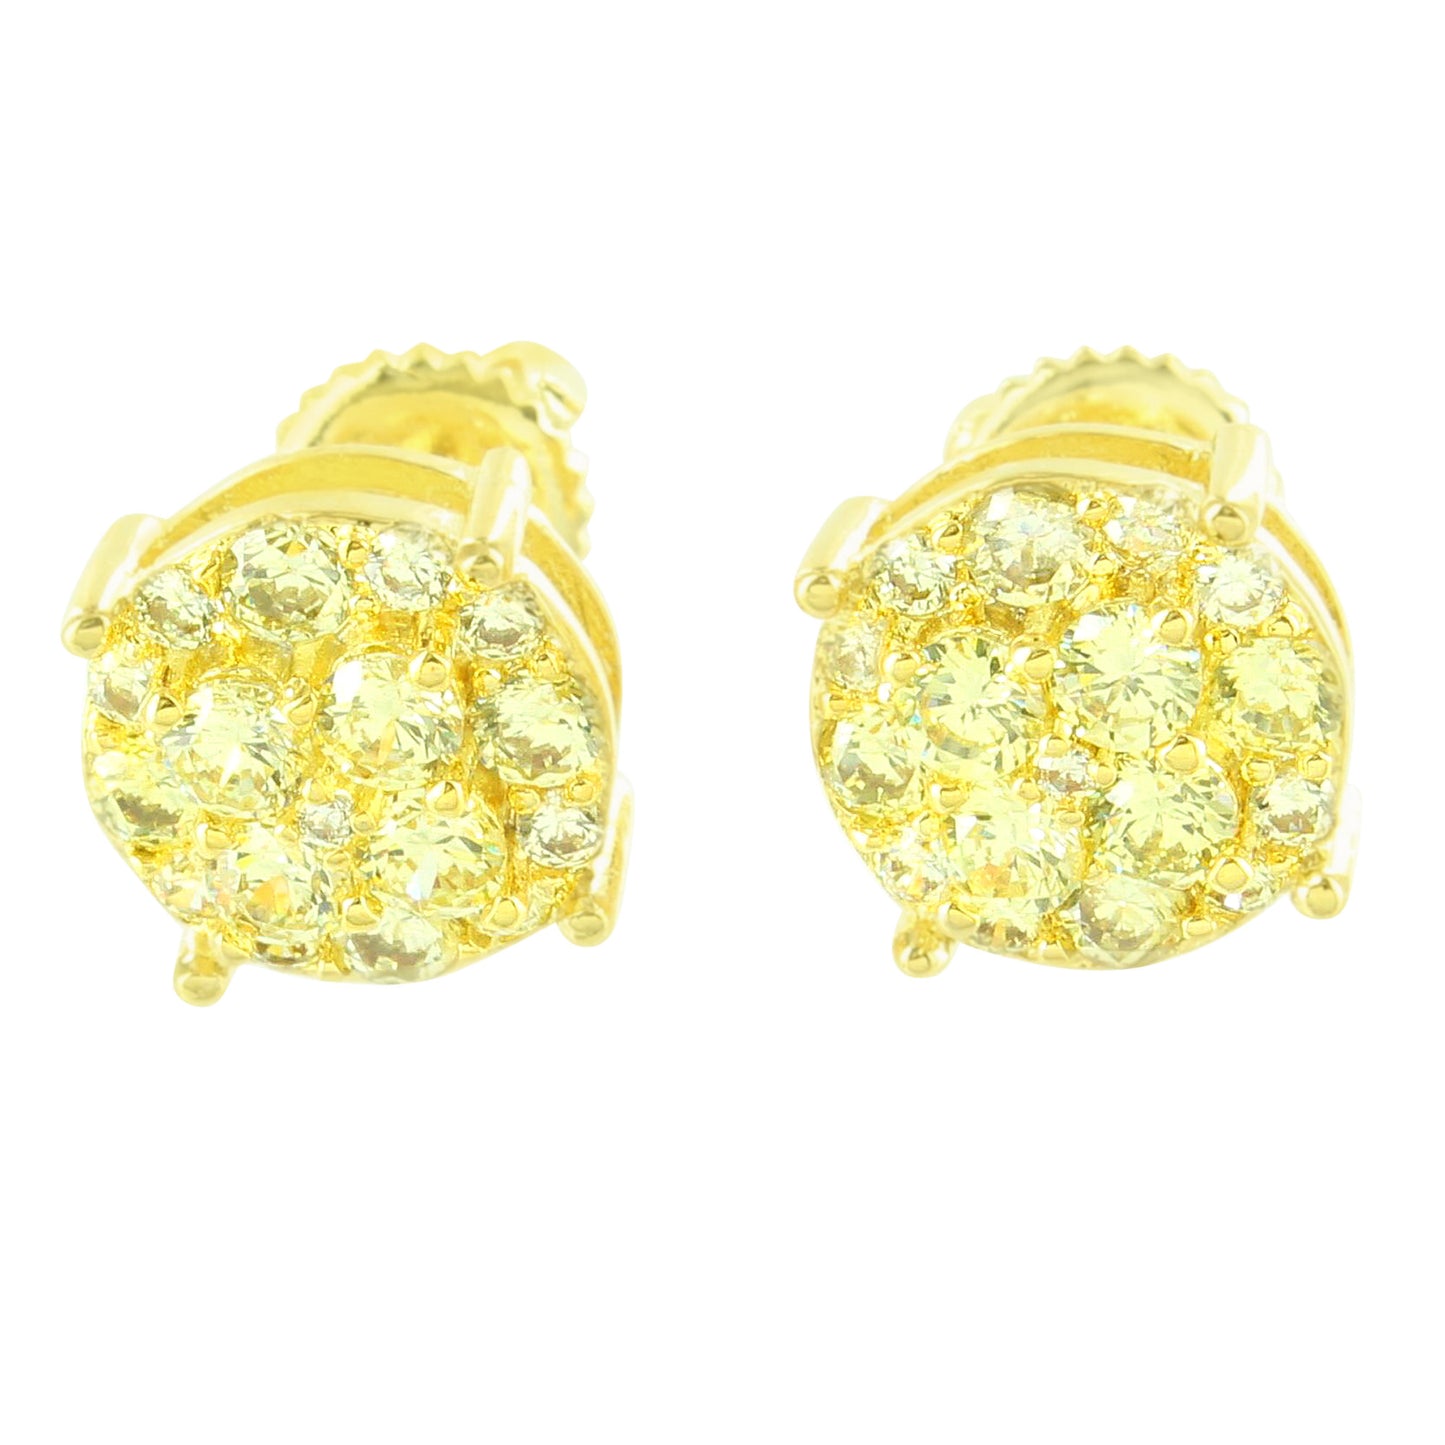 Gold Finish Cluster Earrings Yellow Screw Back Round Design